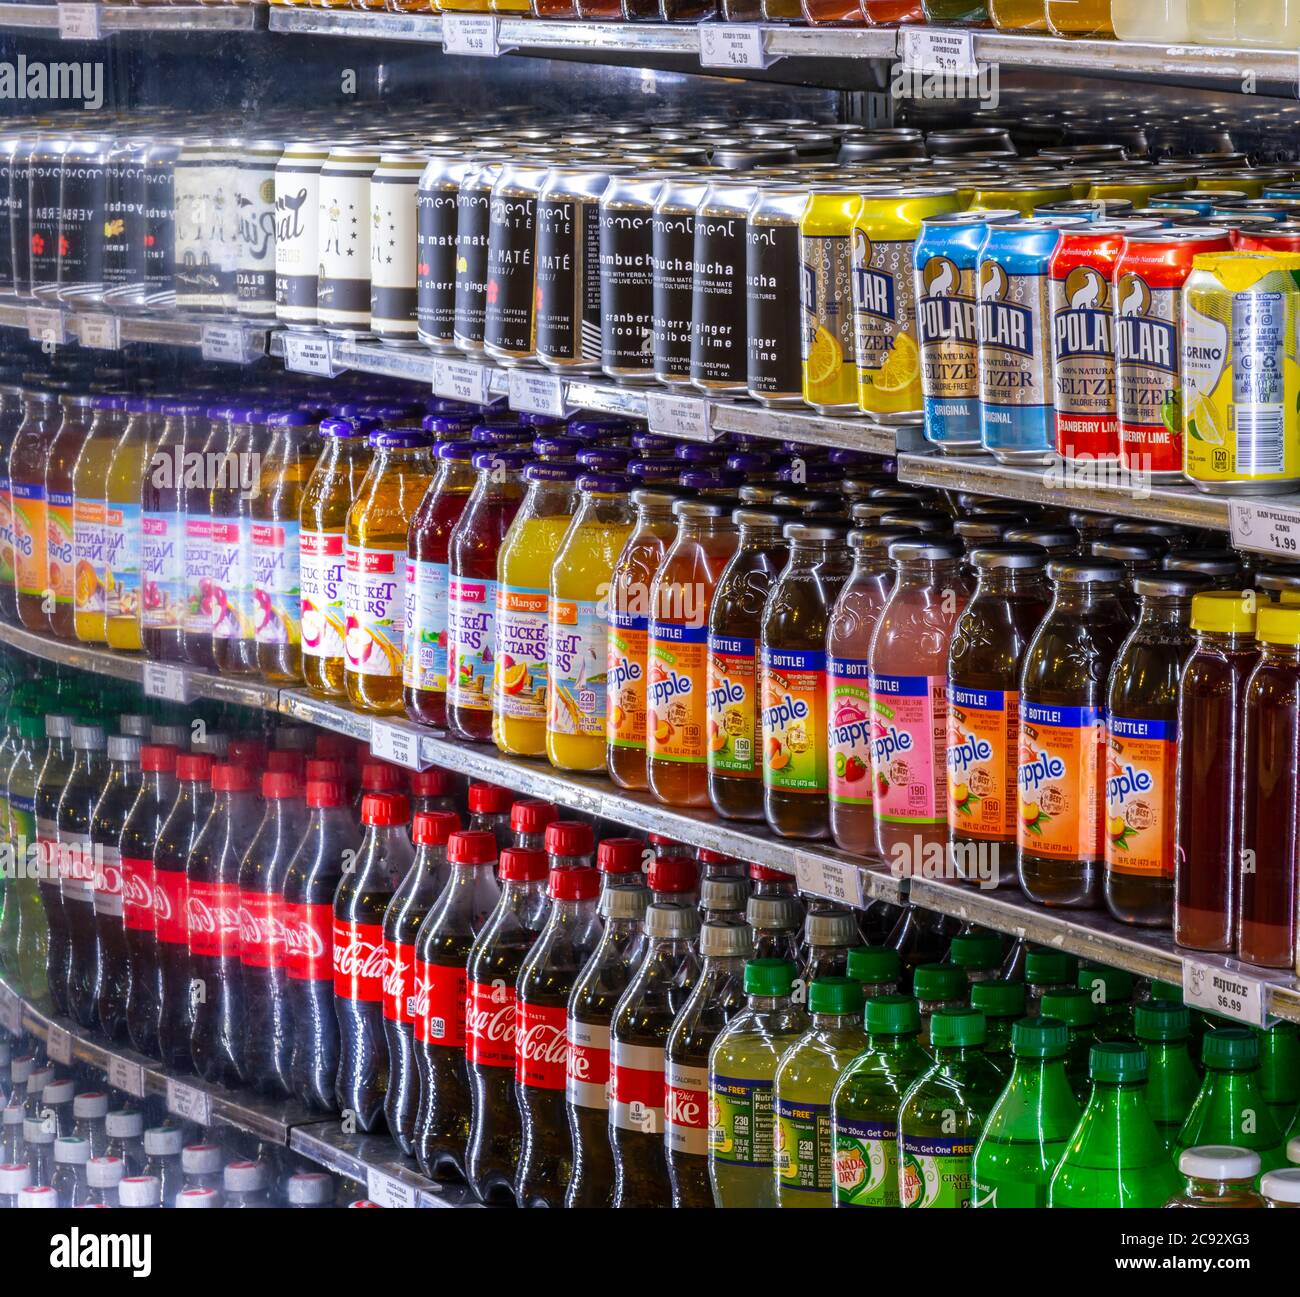 Beverages in refrigerated case in food market, Philadelphia, USA Stock Photo